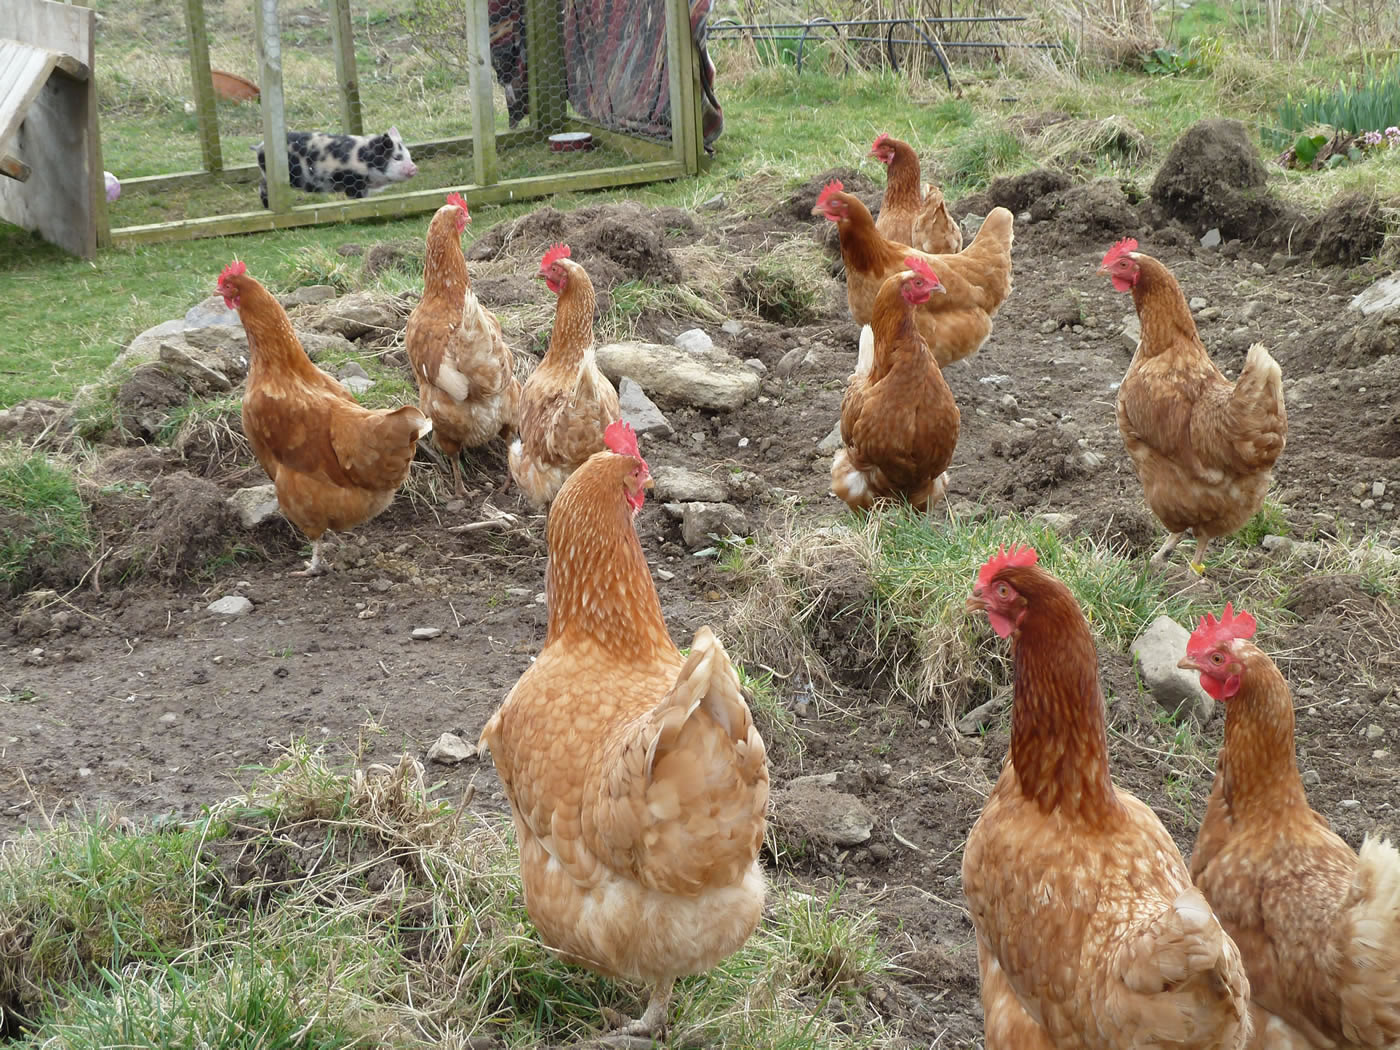 Picture of chickens being very curious about the new arrival on the croft.